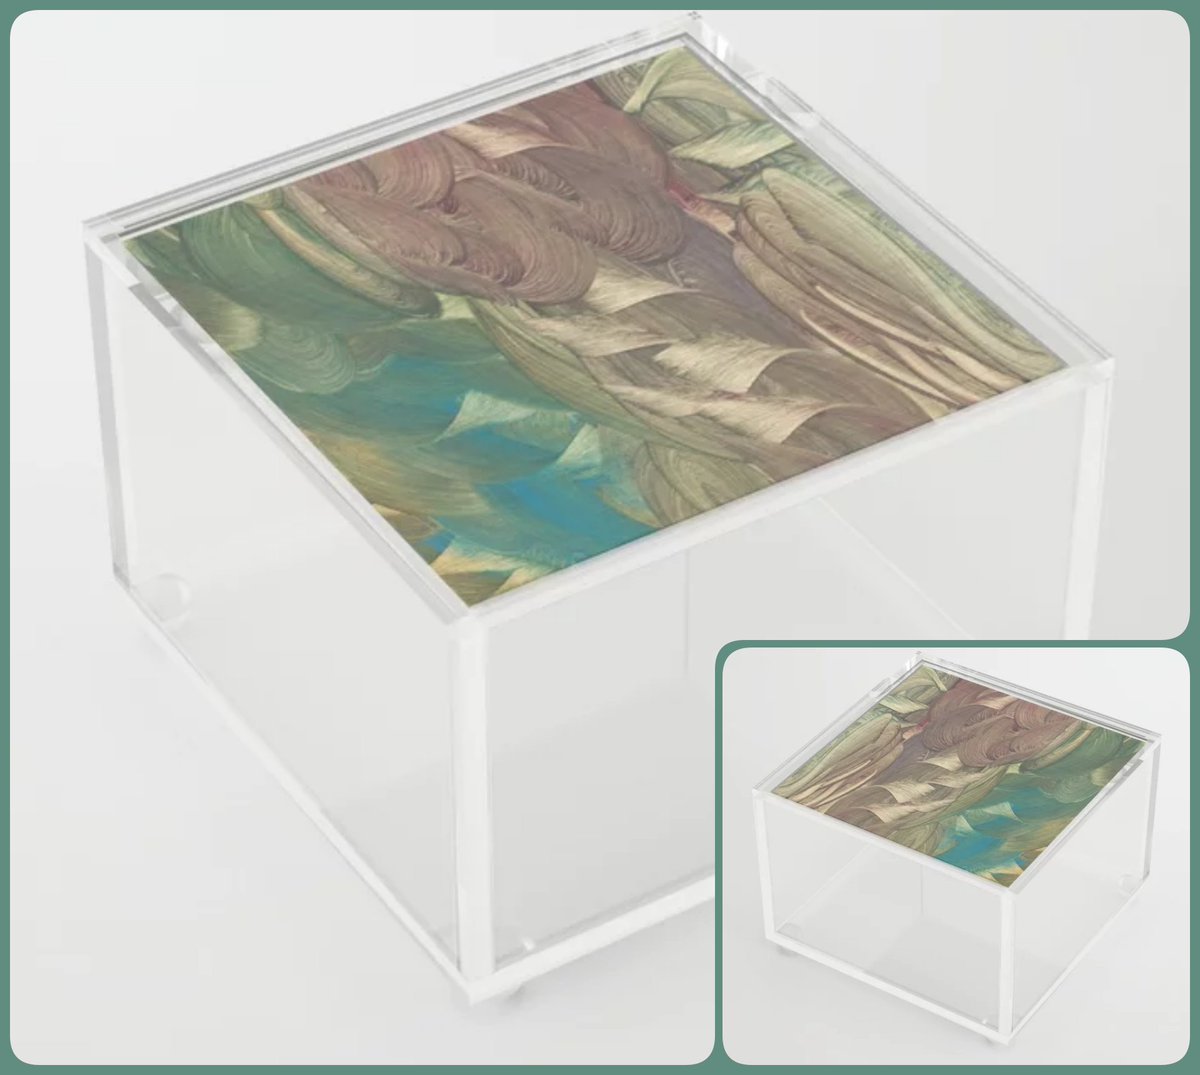 Chenti-cheti Acrylic Box~Art Exquisite!~ #coasters #gifts #trays #mugs #coffee #society6 #artfalaxy #stickers #stationary #art #accents #modern #trendy #wine #water #placemats #desk #office #puzzles #tablecloths #runners #purple #golden #blue #green

society6.com/product/chenti…